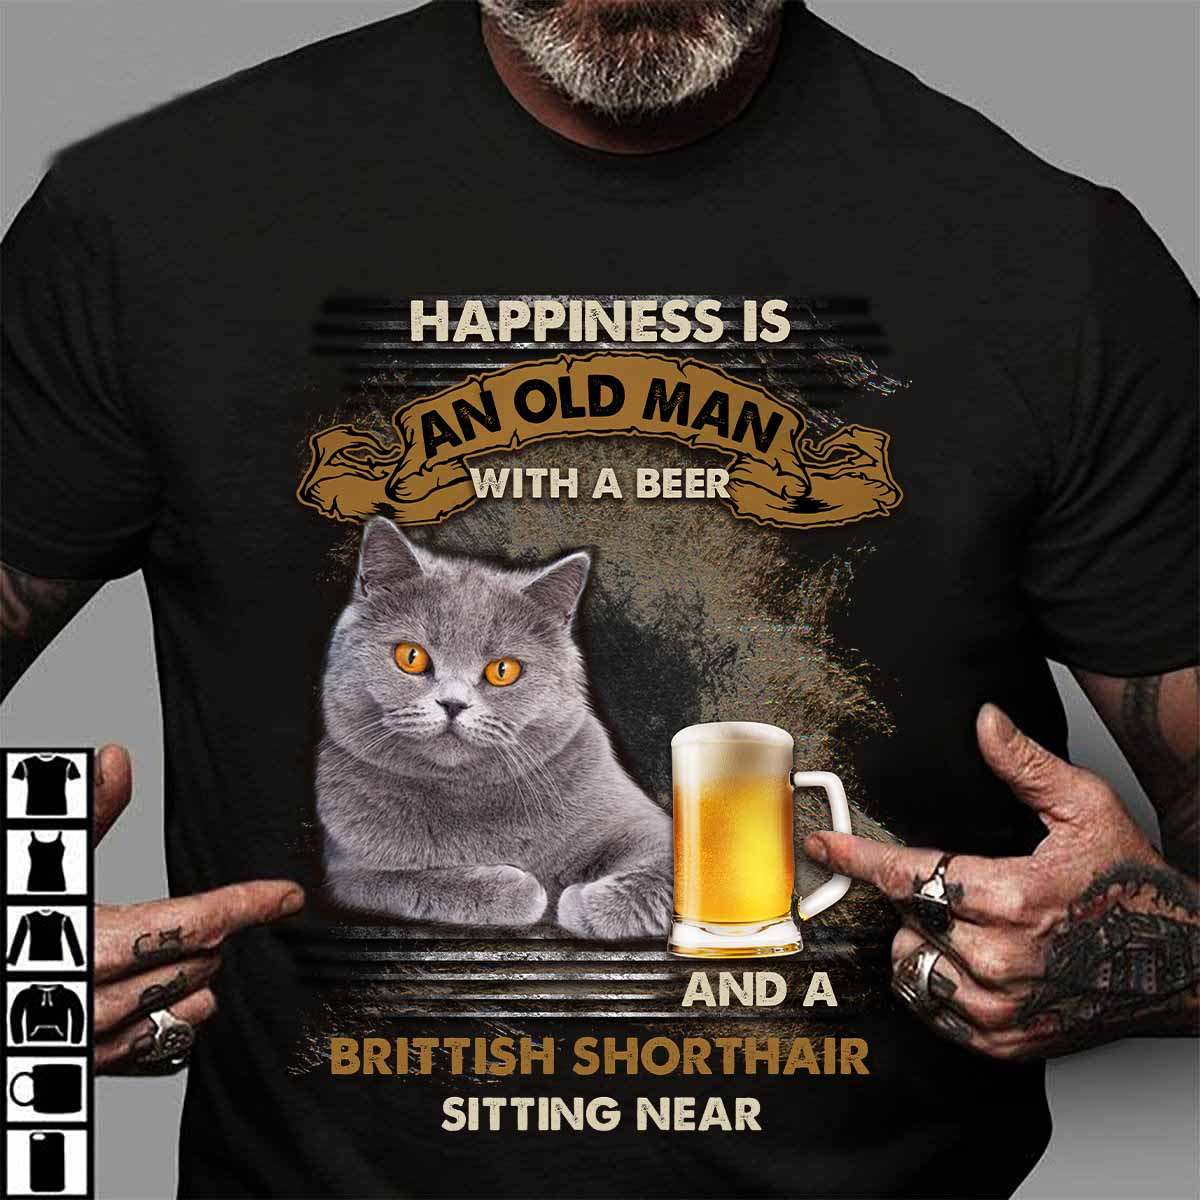 Happiness is an old man with a beer and a Brittish shorthair sitting near